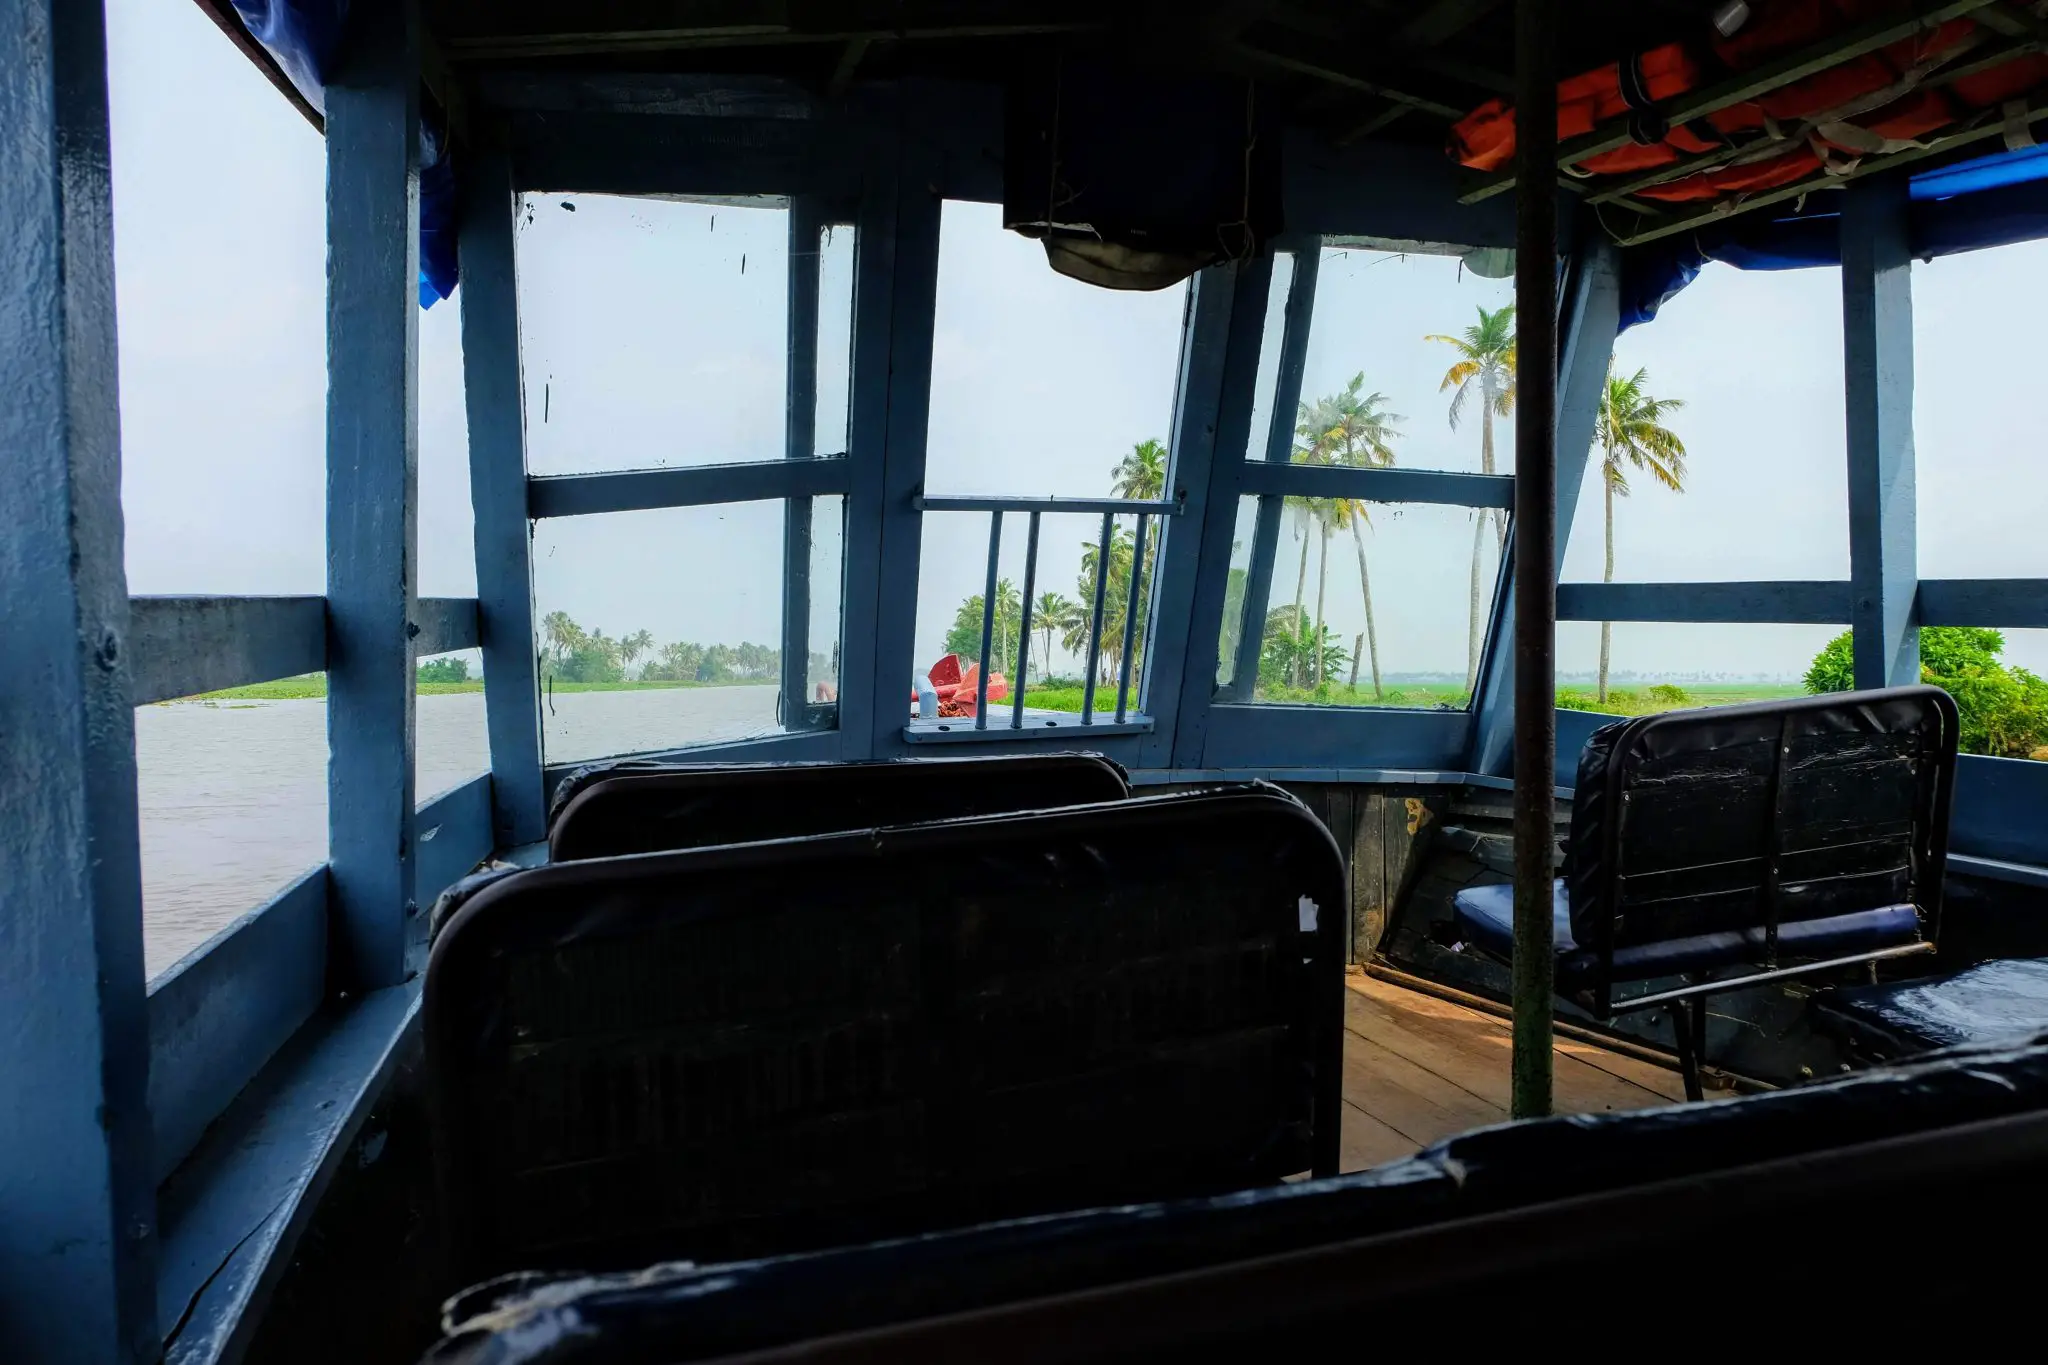 The inside of the Kerala state ferry